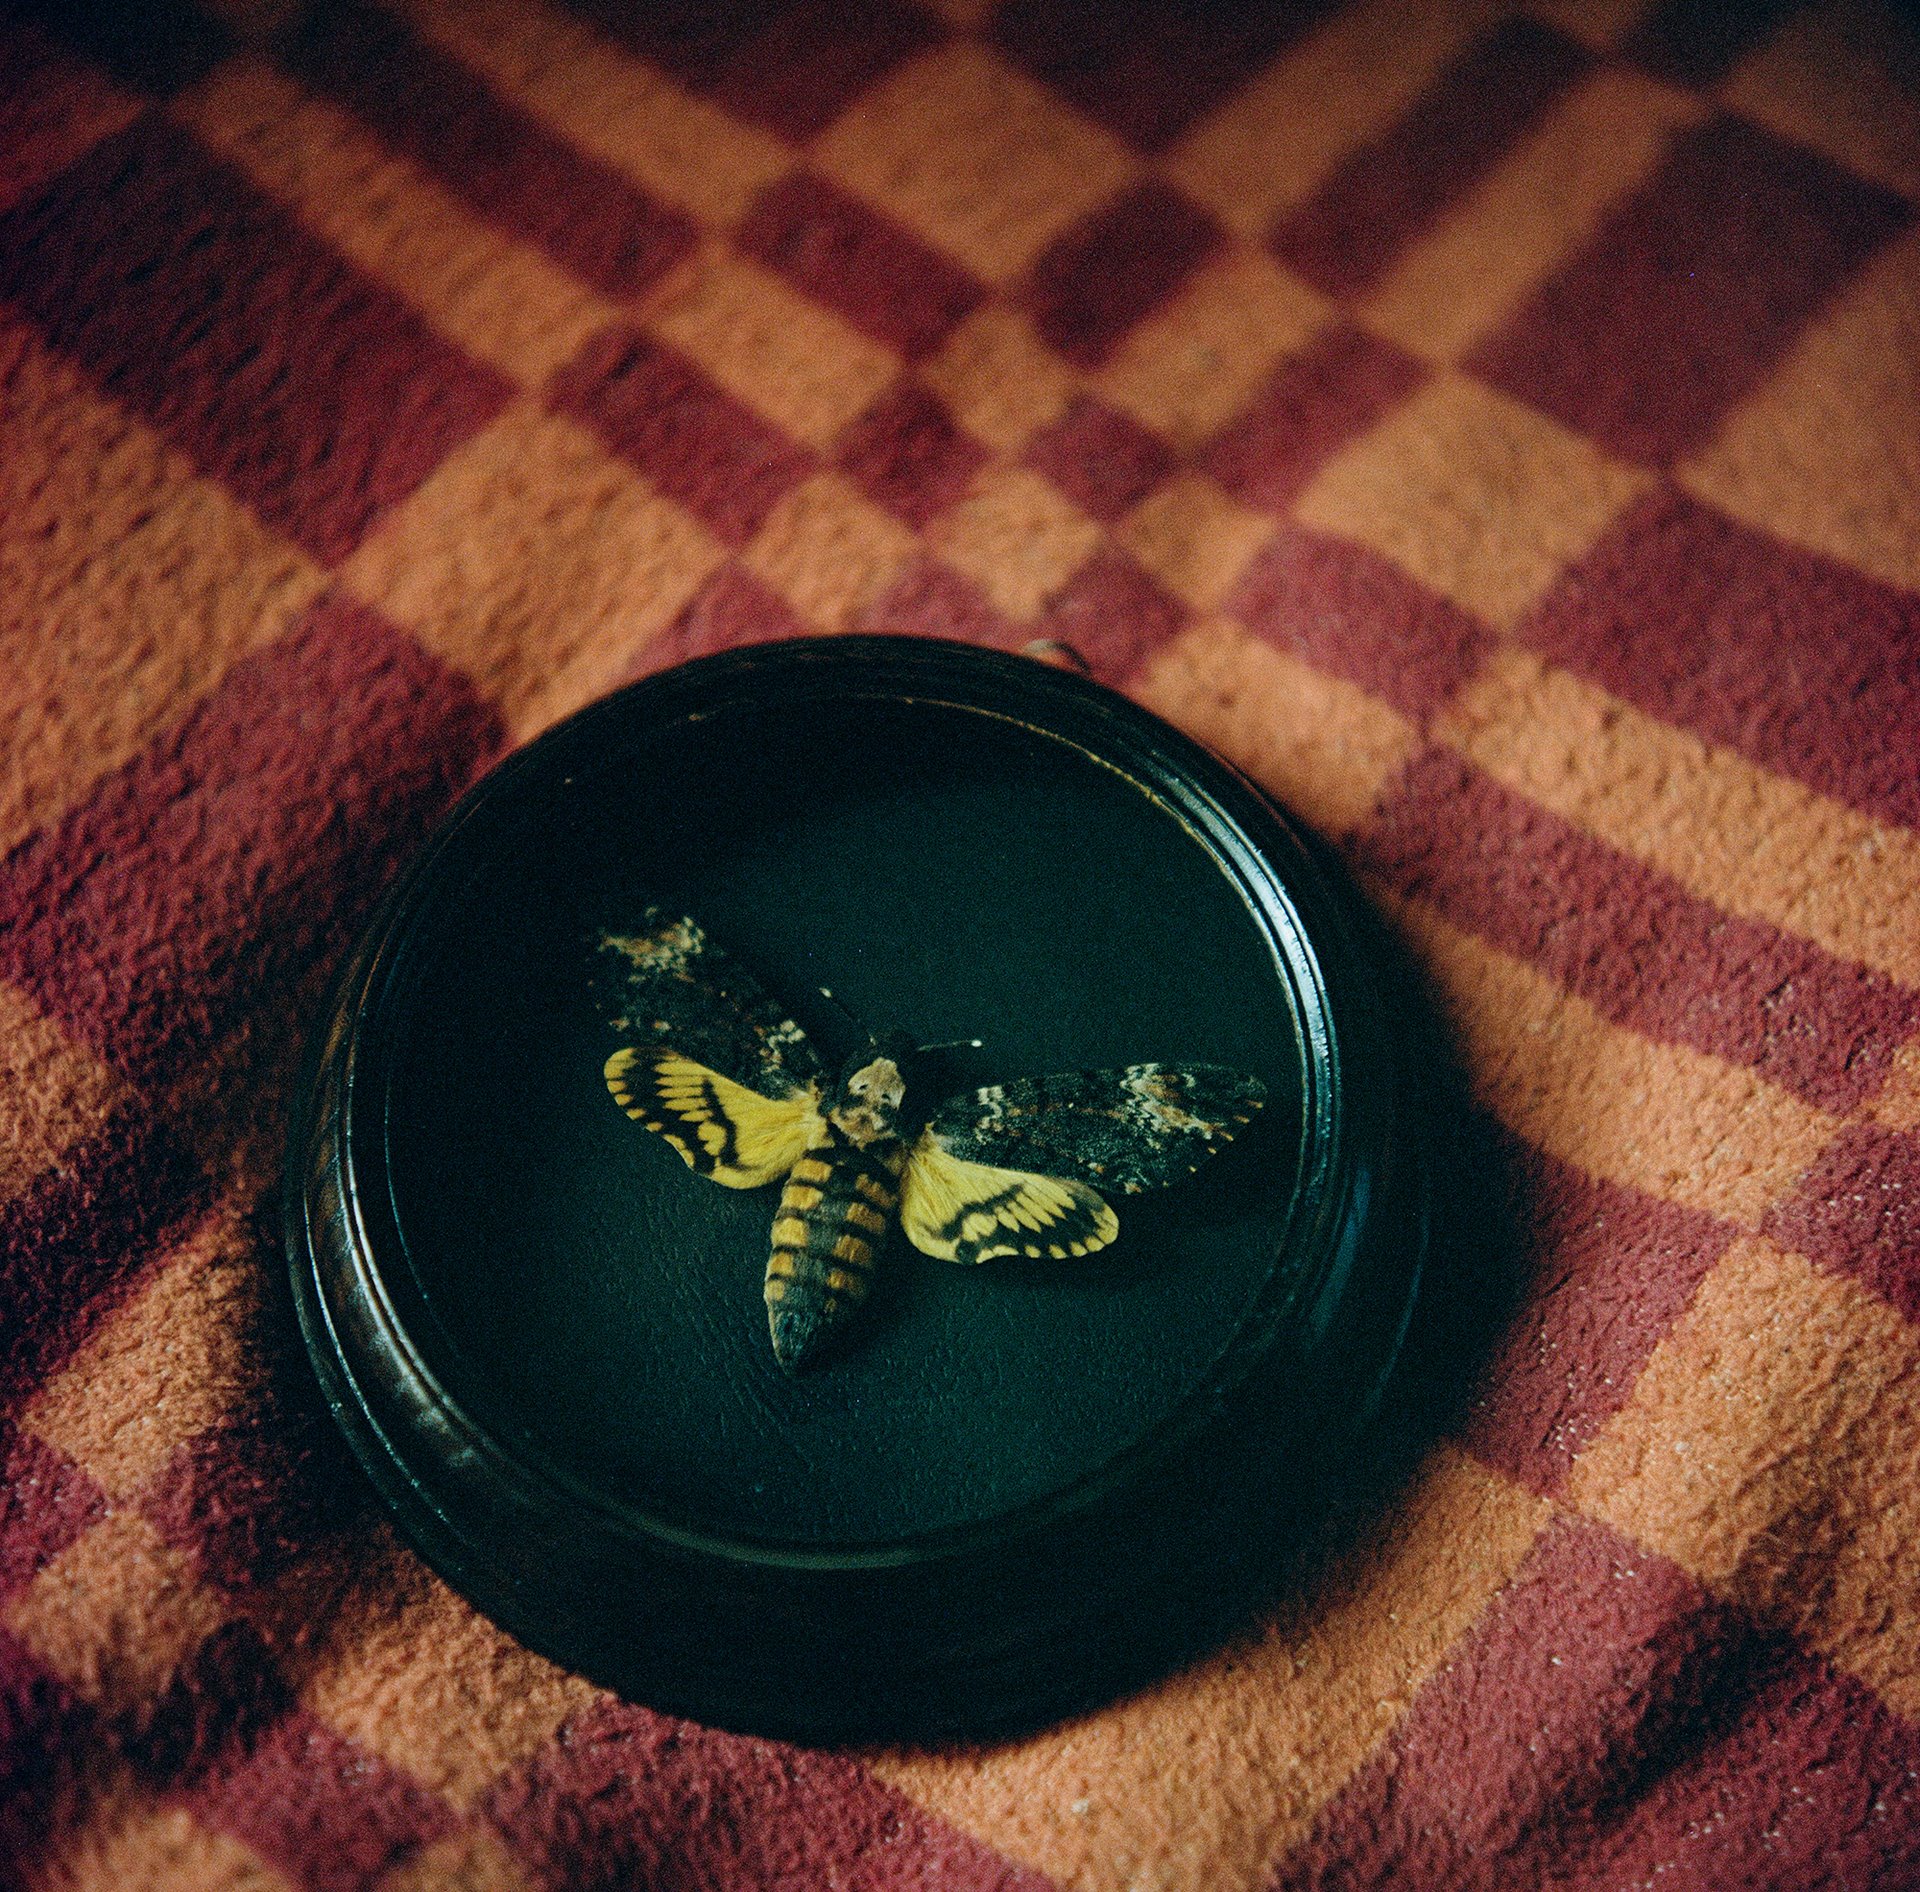 <em>Acherontia atropos</em>, also known as death&rsquo;s-head hawkmoth, encased in a frame in Parkev Kazarian&rsquo;s home in Gyumri, Armenia. Kazarian recalled many trips with Rustam Effendi hunting butterflies in the Caucasus mountains. Every butterfly came with a story of a place, an adventure that led to its capture: &ldquo;You sit at home and it&rsquo;s cold outside, snowing and the dogs are howling. But then you look at the butterflies and the memories come flooding back and warm your heart.&rdquo; &ndash; Parkev Kazarian.&nbsp;